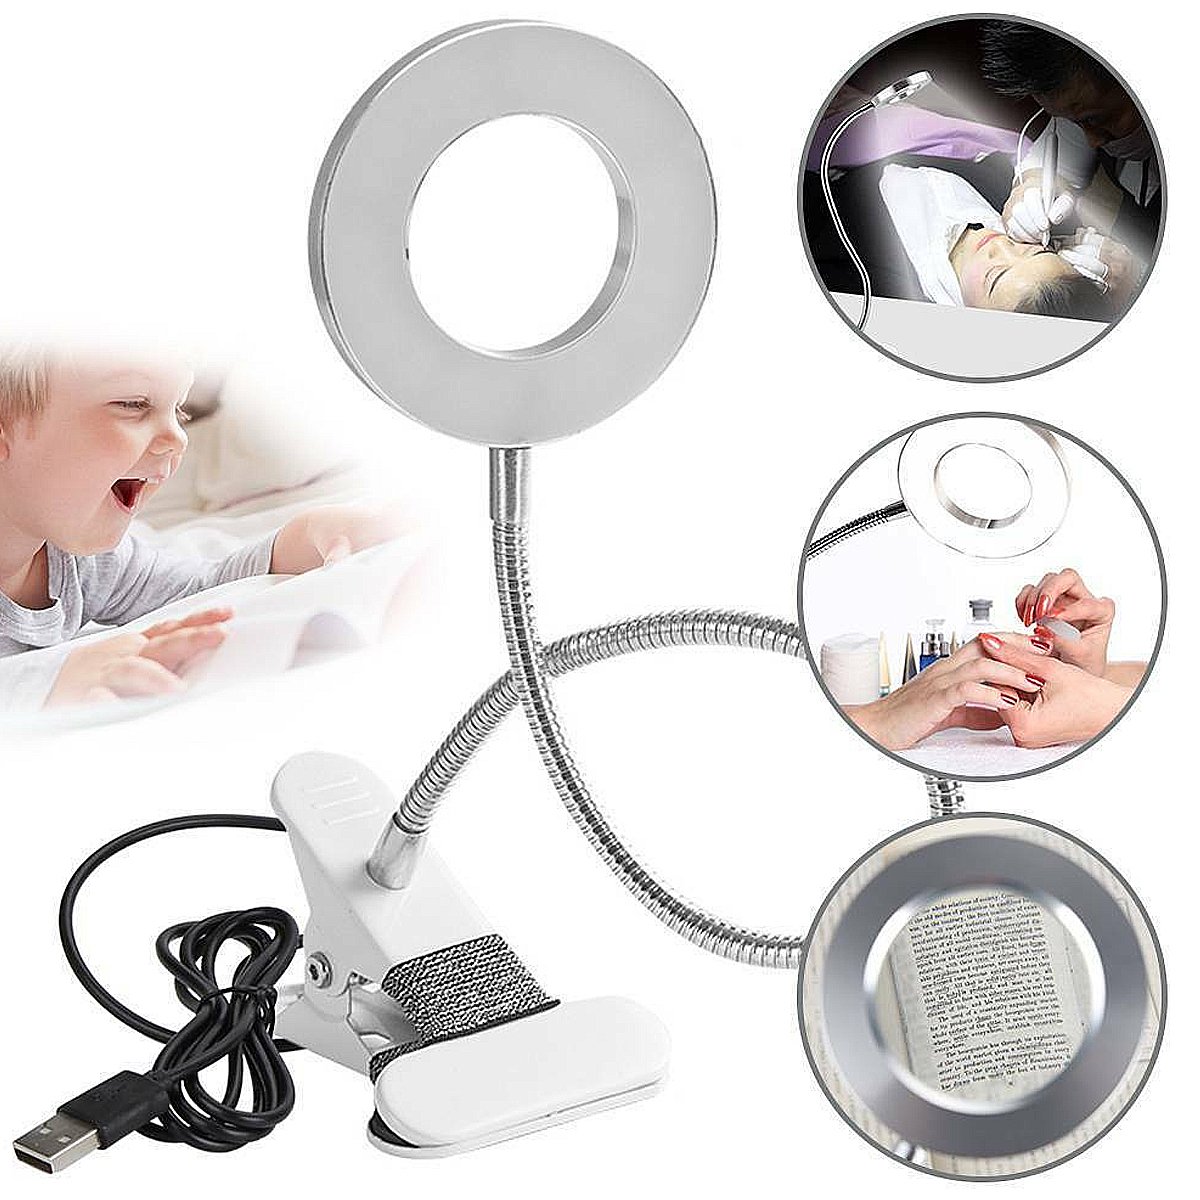 10W-X8-Magnifying-Lamp-Desk-Table-Top-Glass-Beauty-Nail-Salon-Tattoo-Magnifier-Light-1763706-2